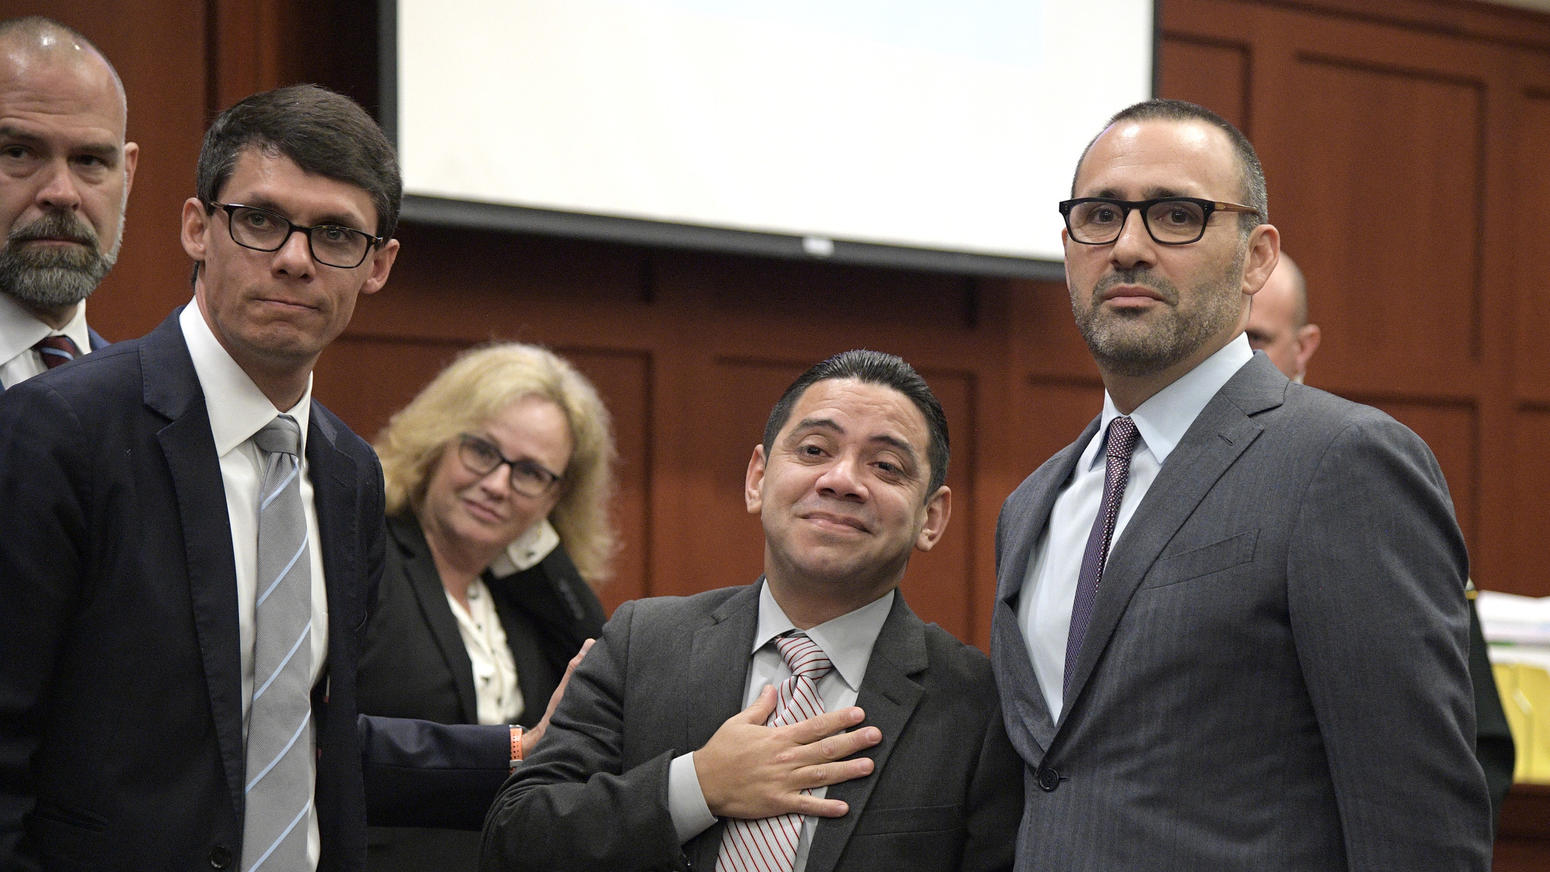 Innocent Man Who Spent Over a Decade on Florida’s Death Row is Exonerated